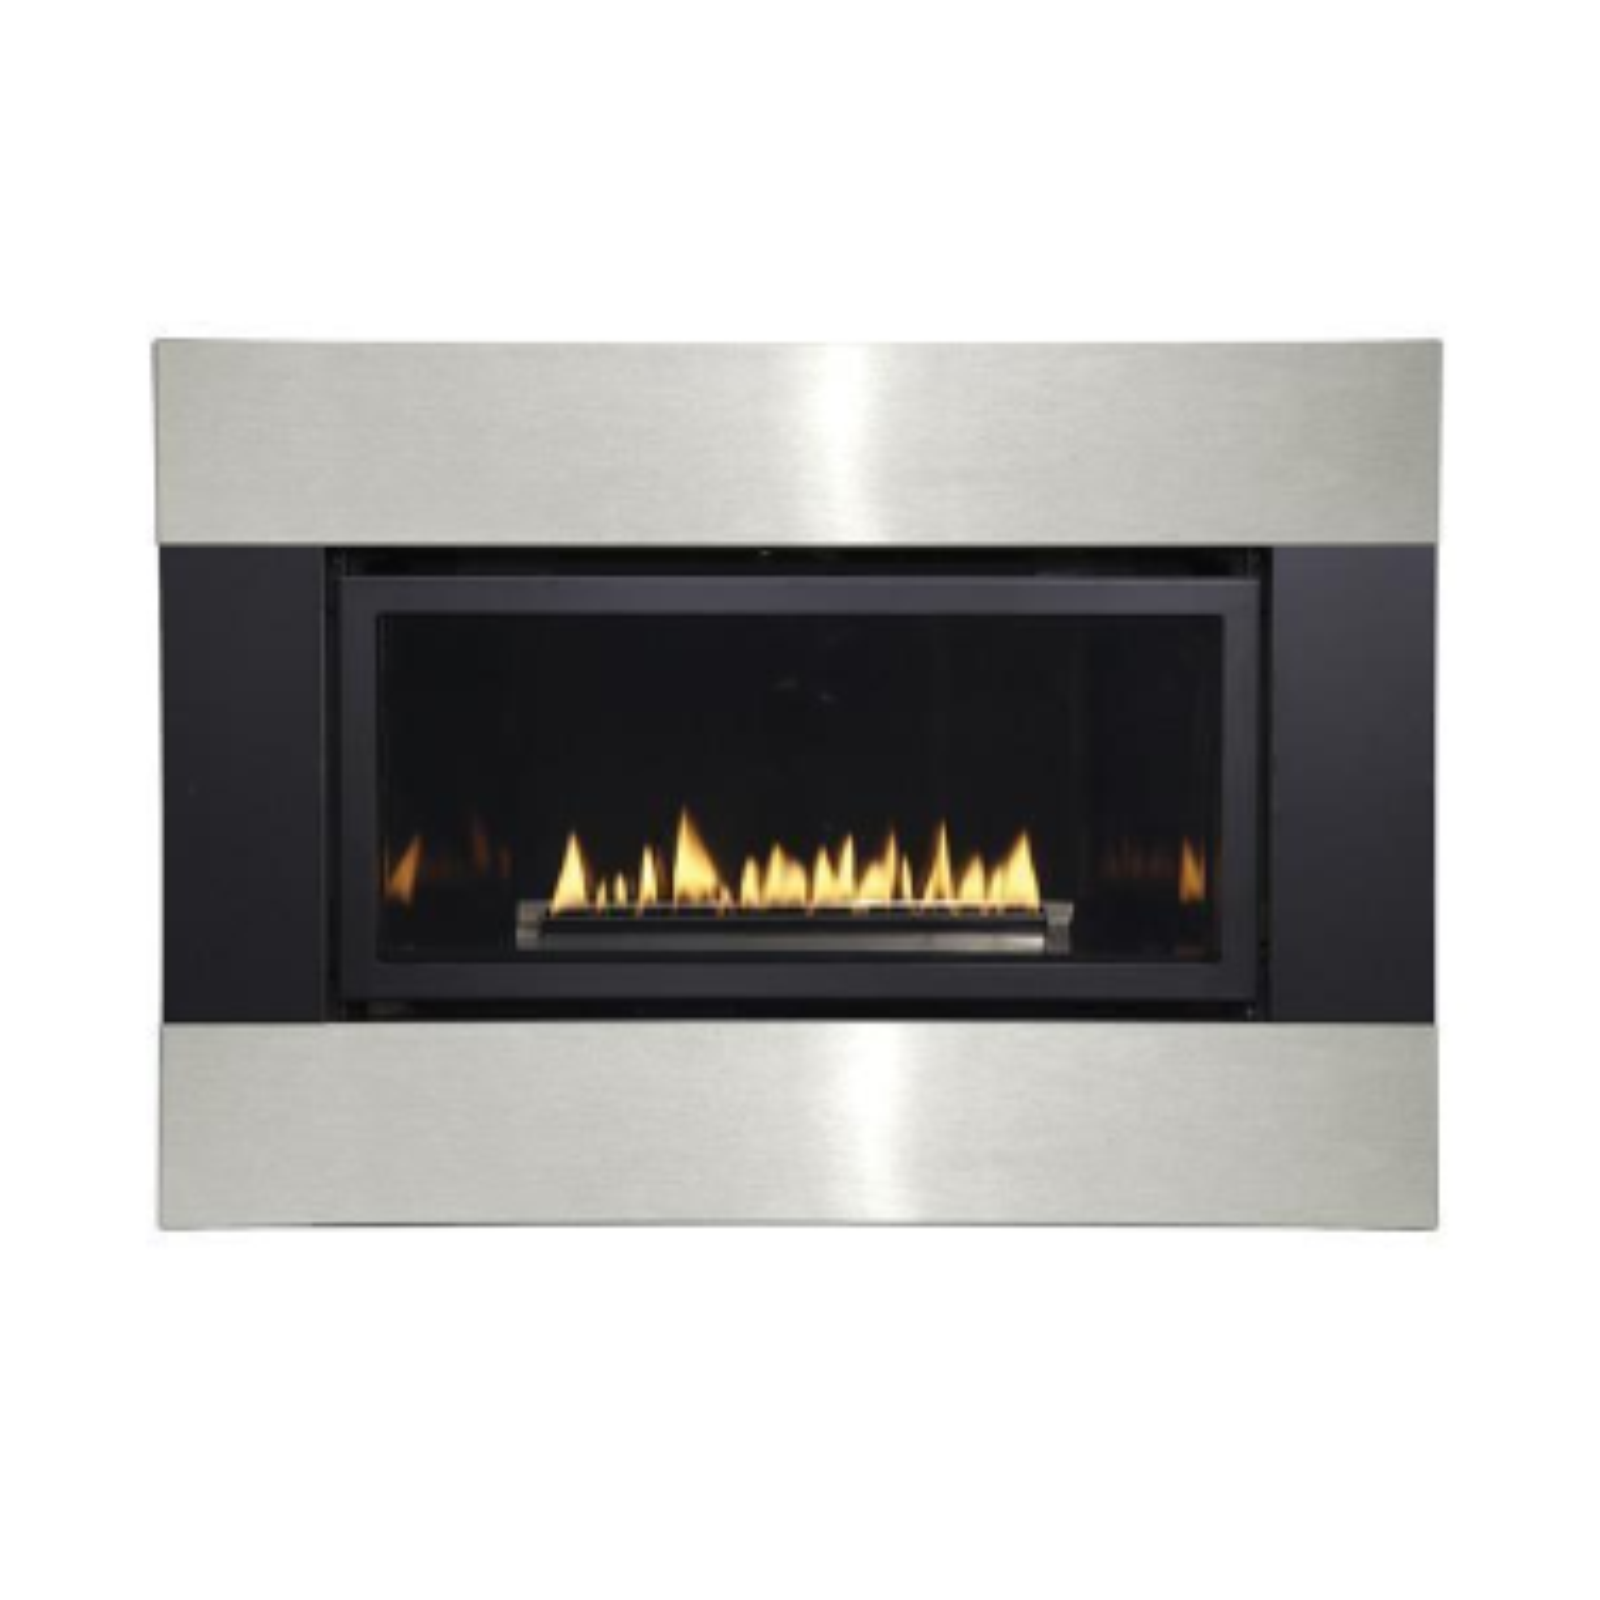 Empire Black and Stainless Surround with Barrier - DFQ25M4BLSS|